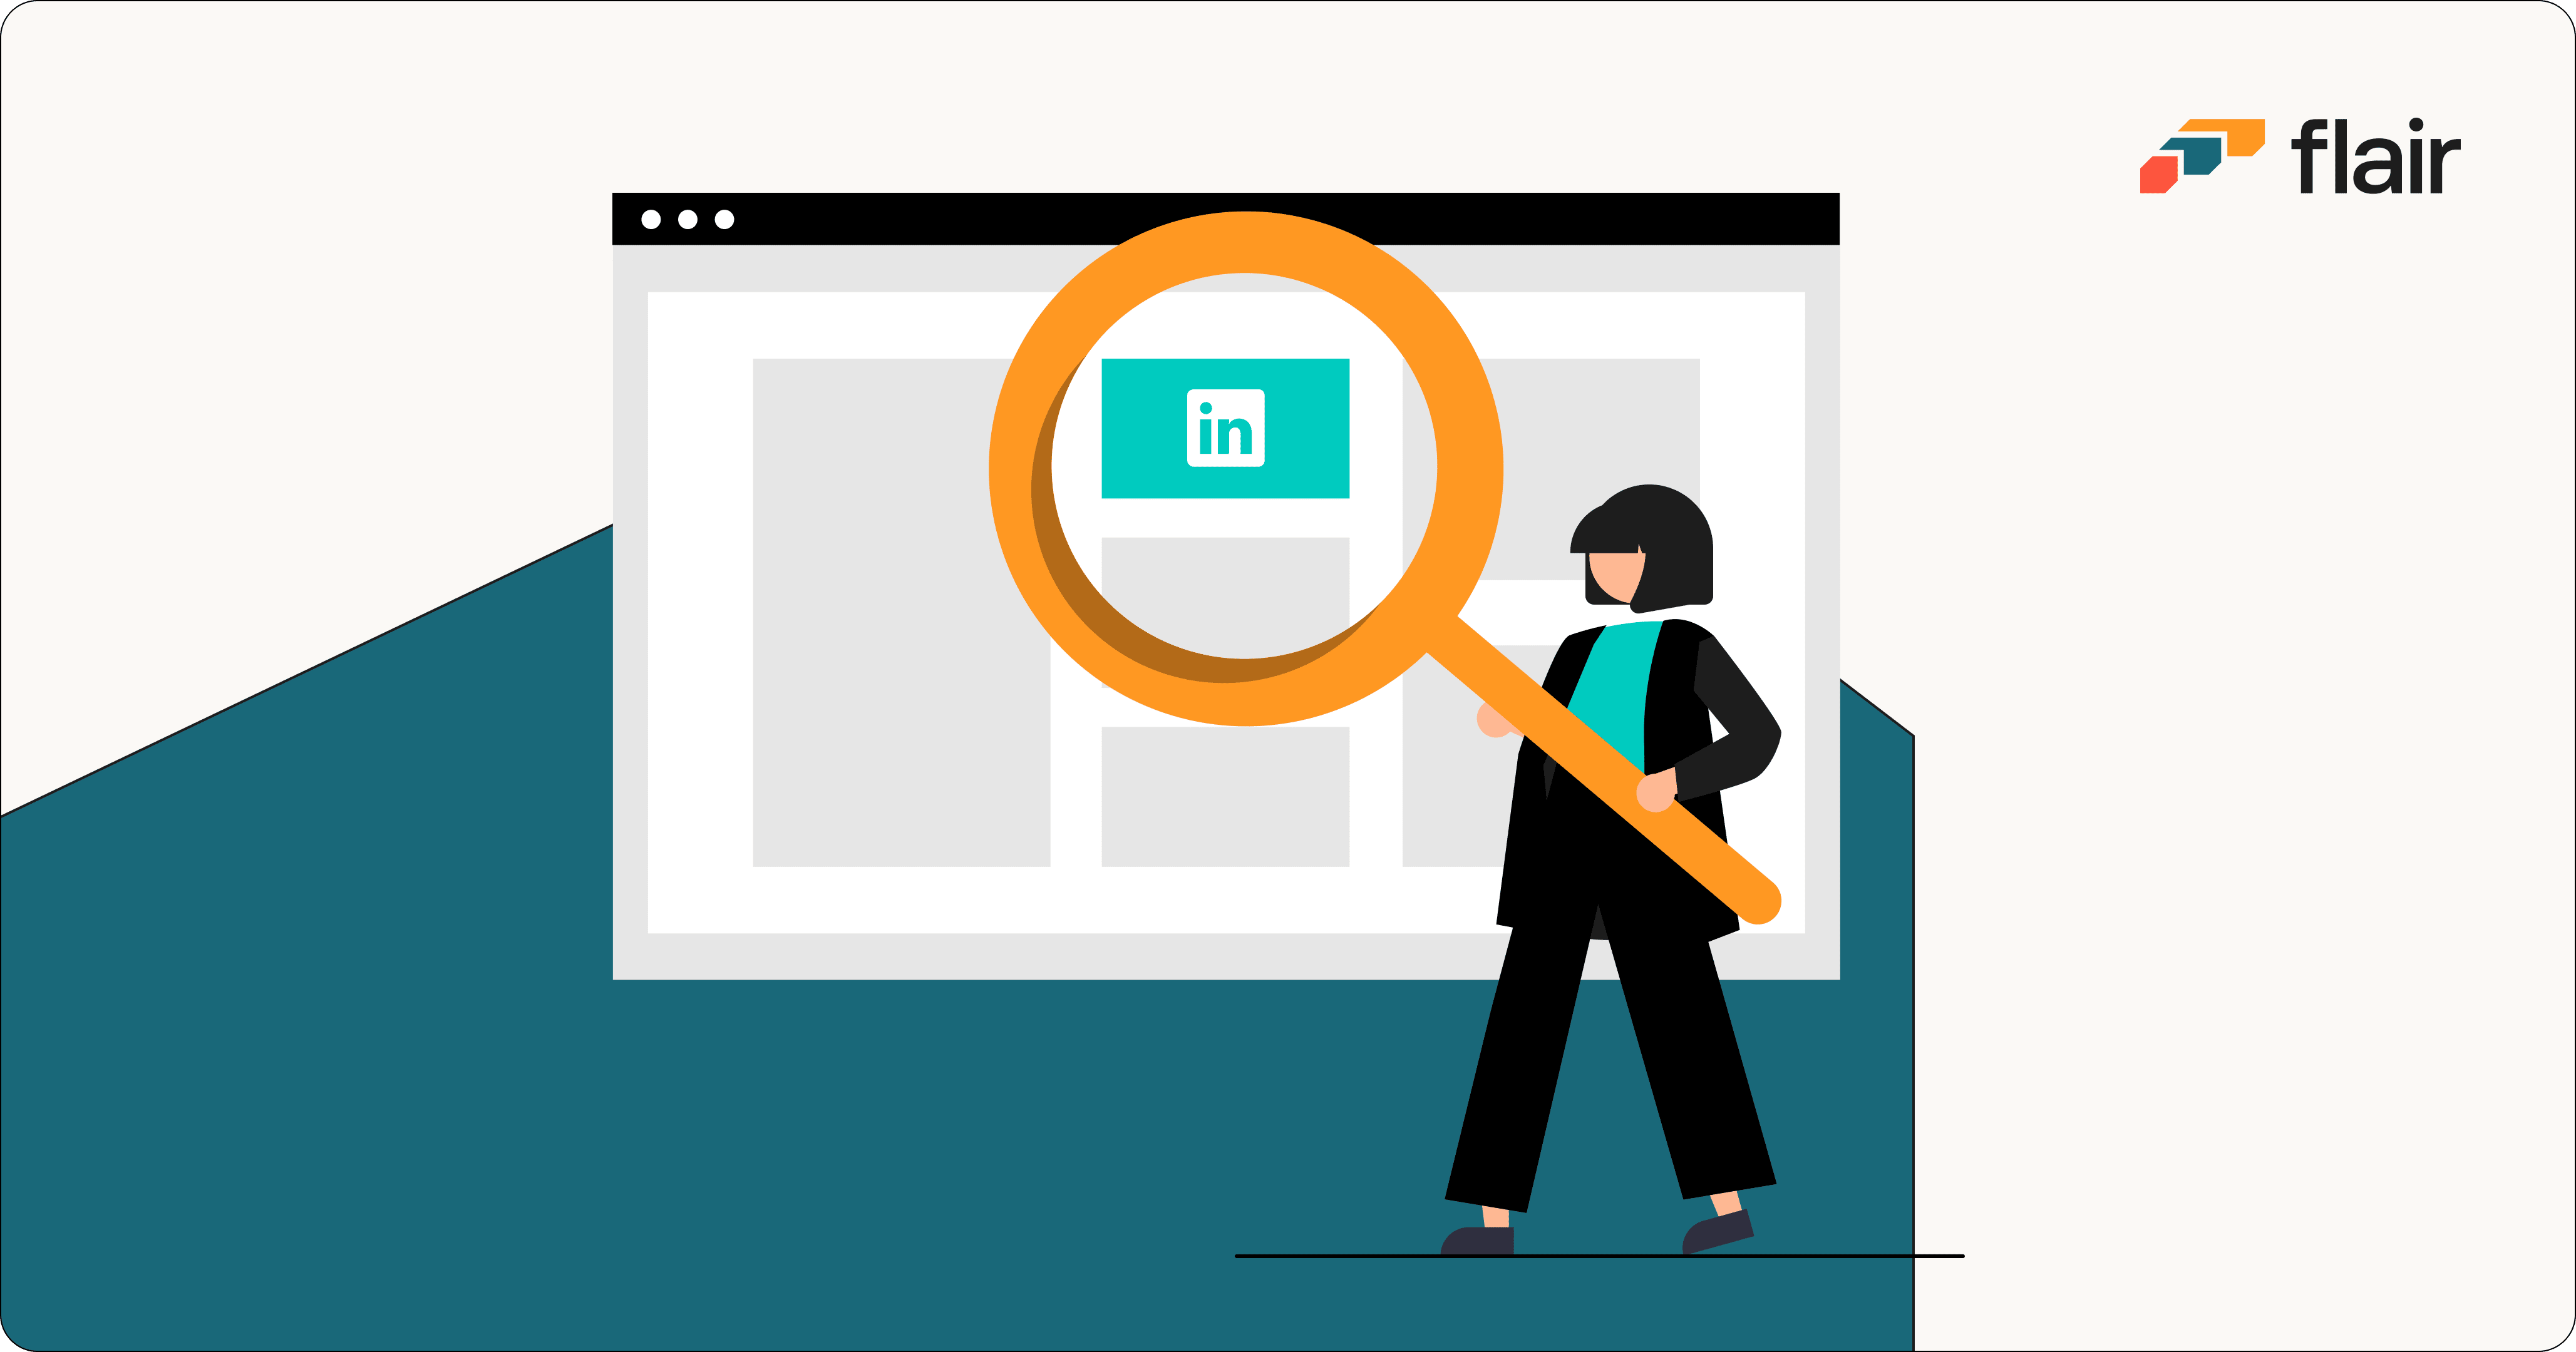 Illustration of recruiter searching for job candidates on LinkedIn